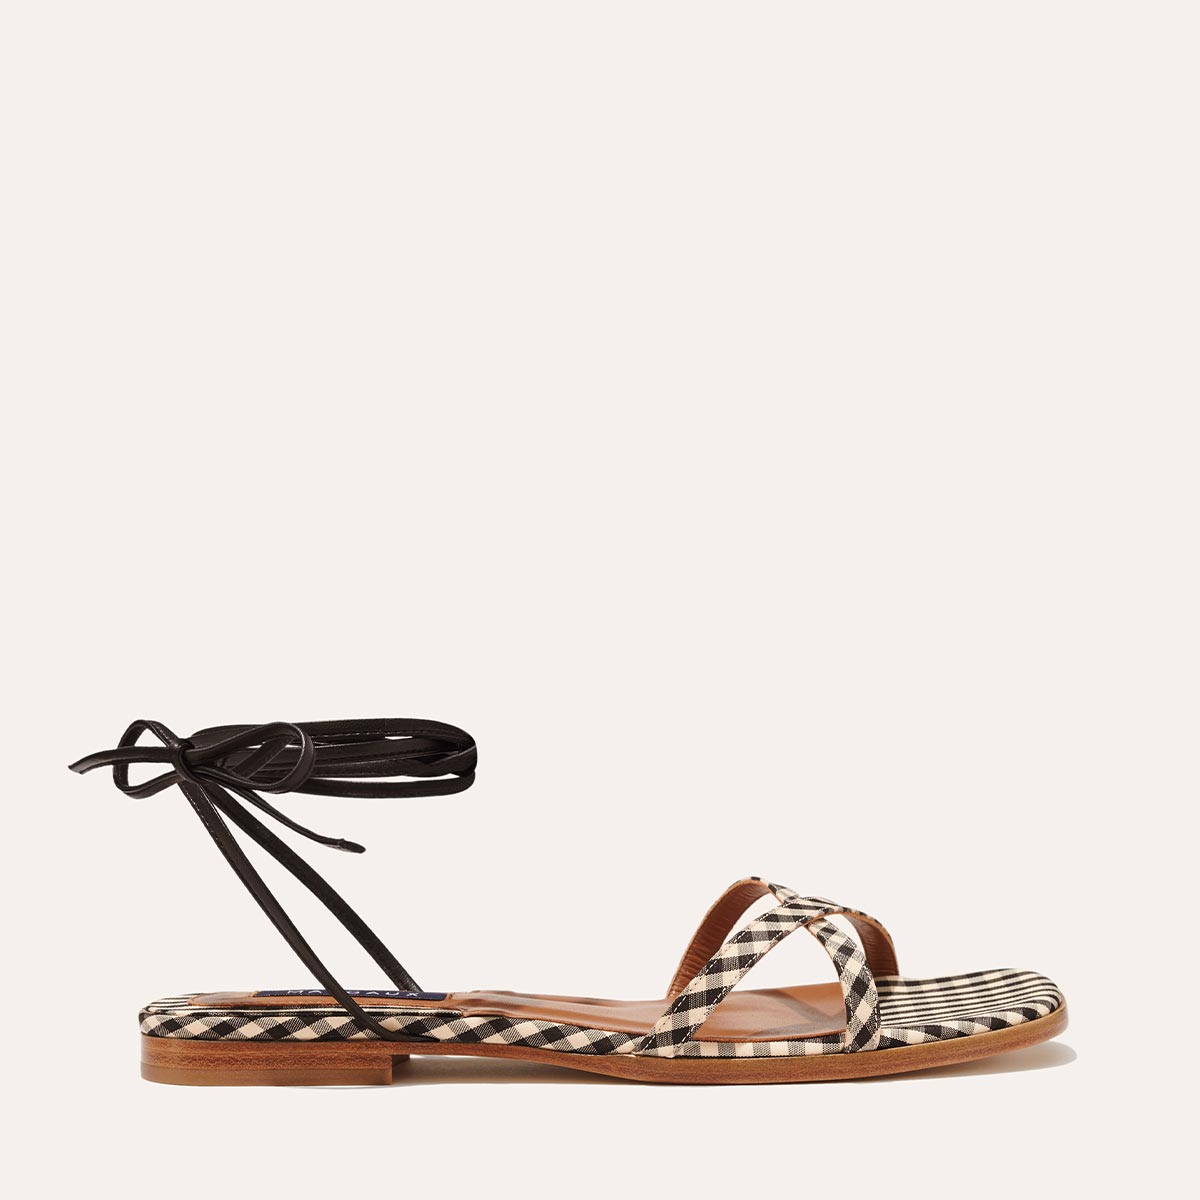 Margaux's classic strappy Wrap Sandal with ankle ties, made in Spain from soft, black Italian nappa leather and gingham fabric